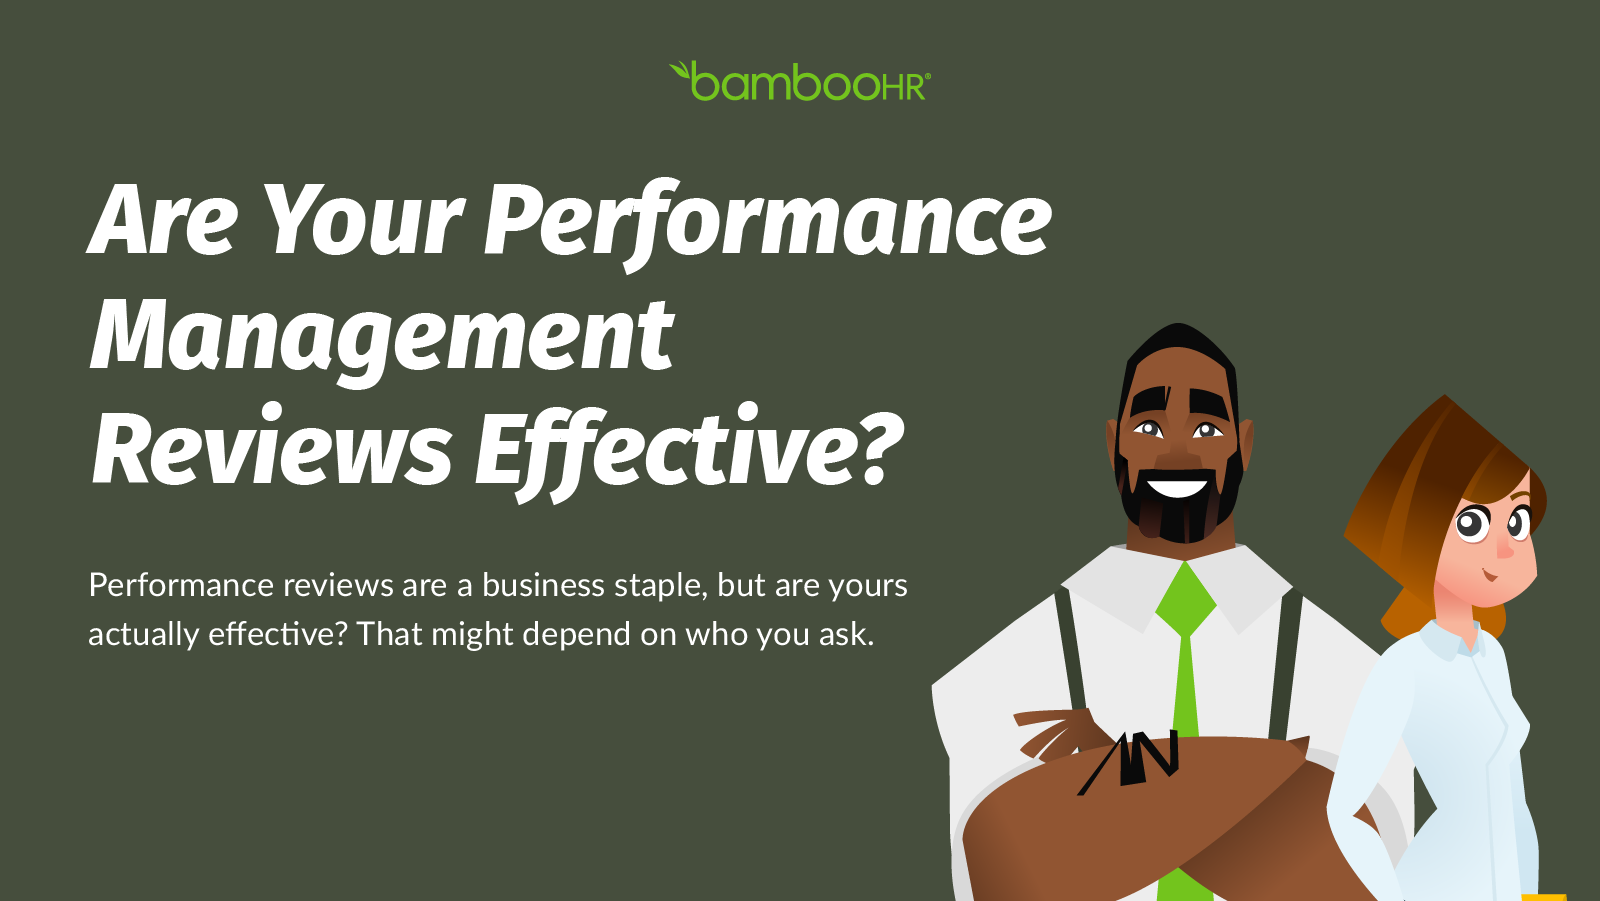 Are Your Performance Management Reviews Effective?